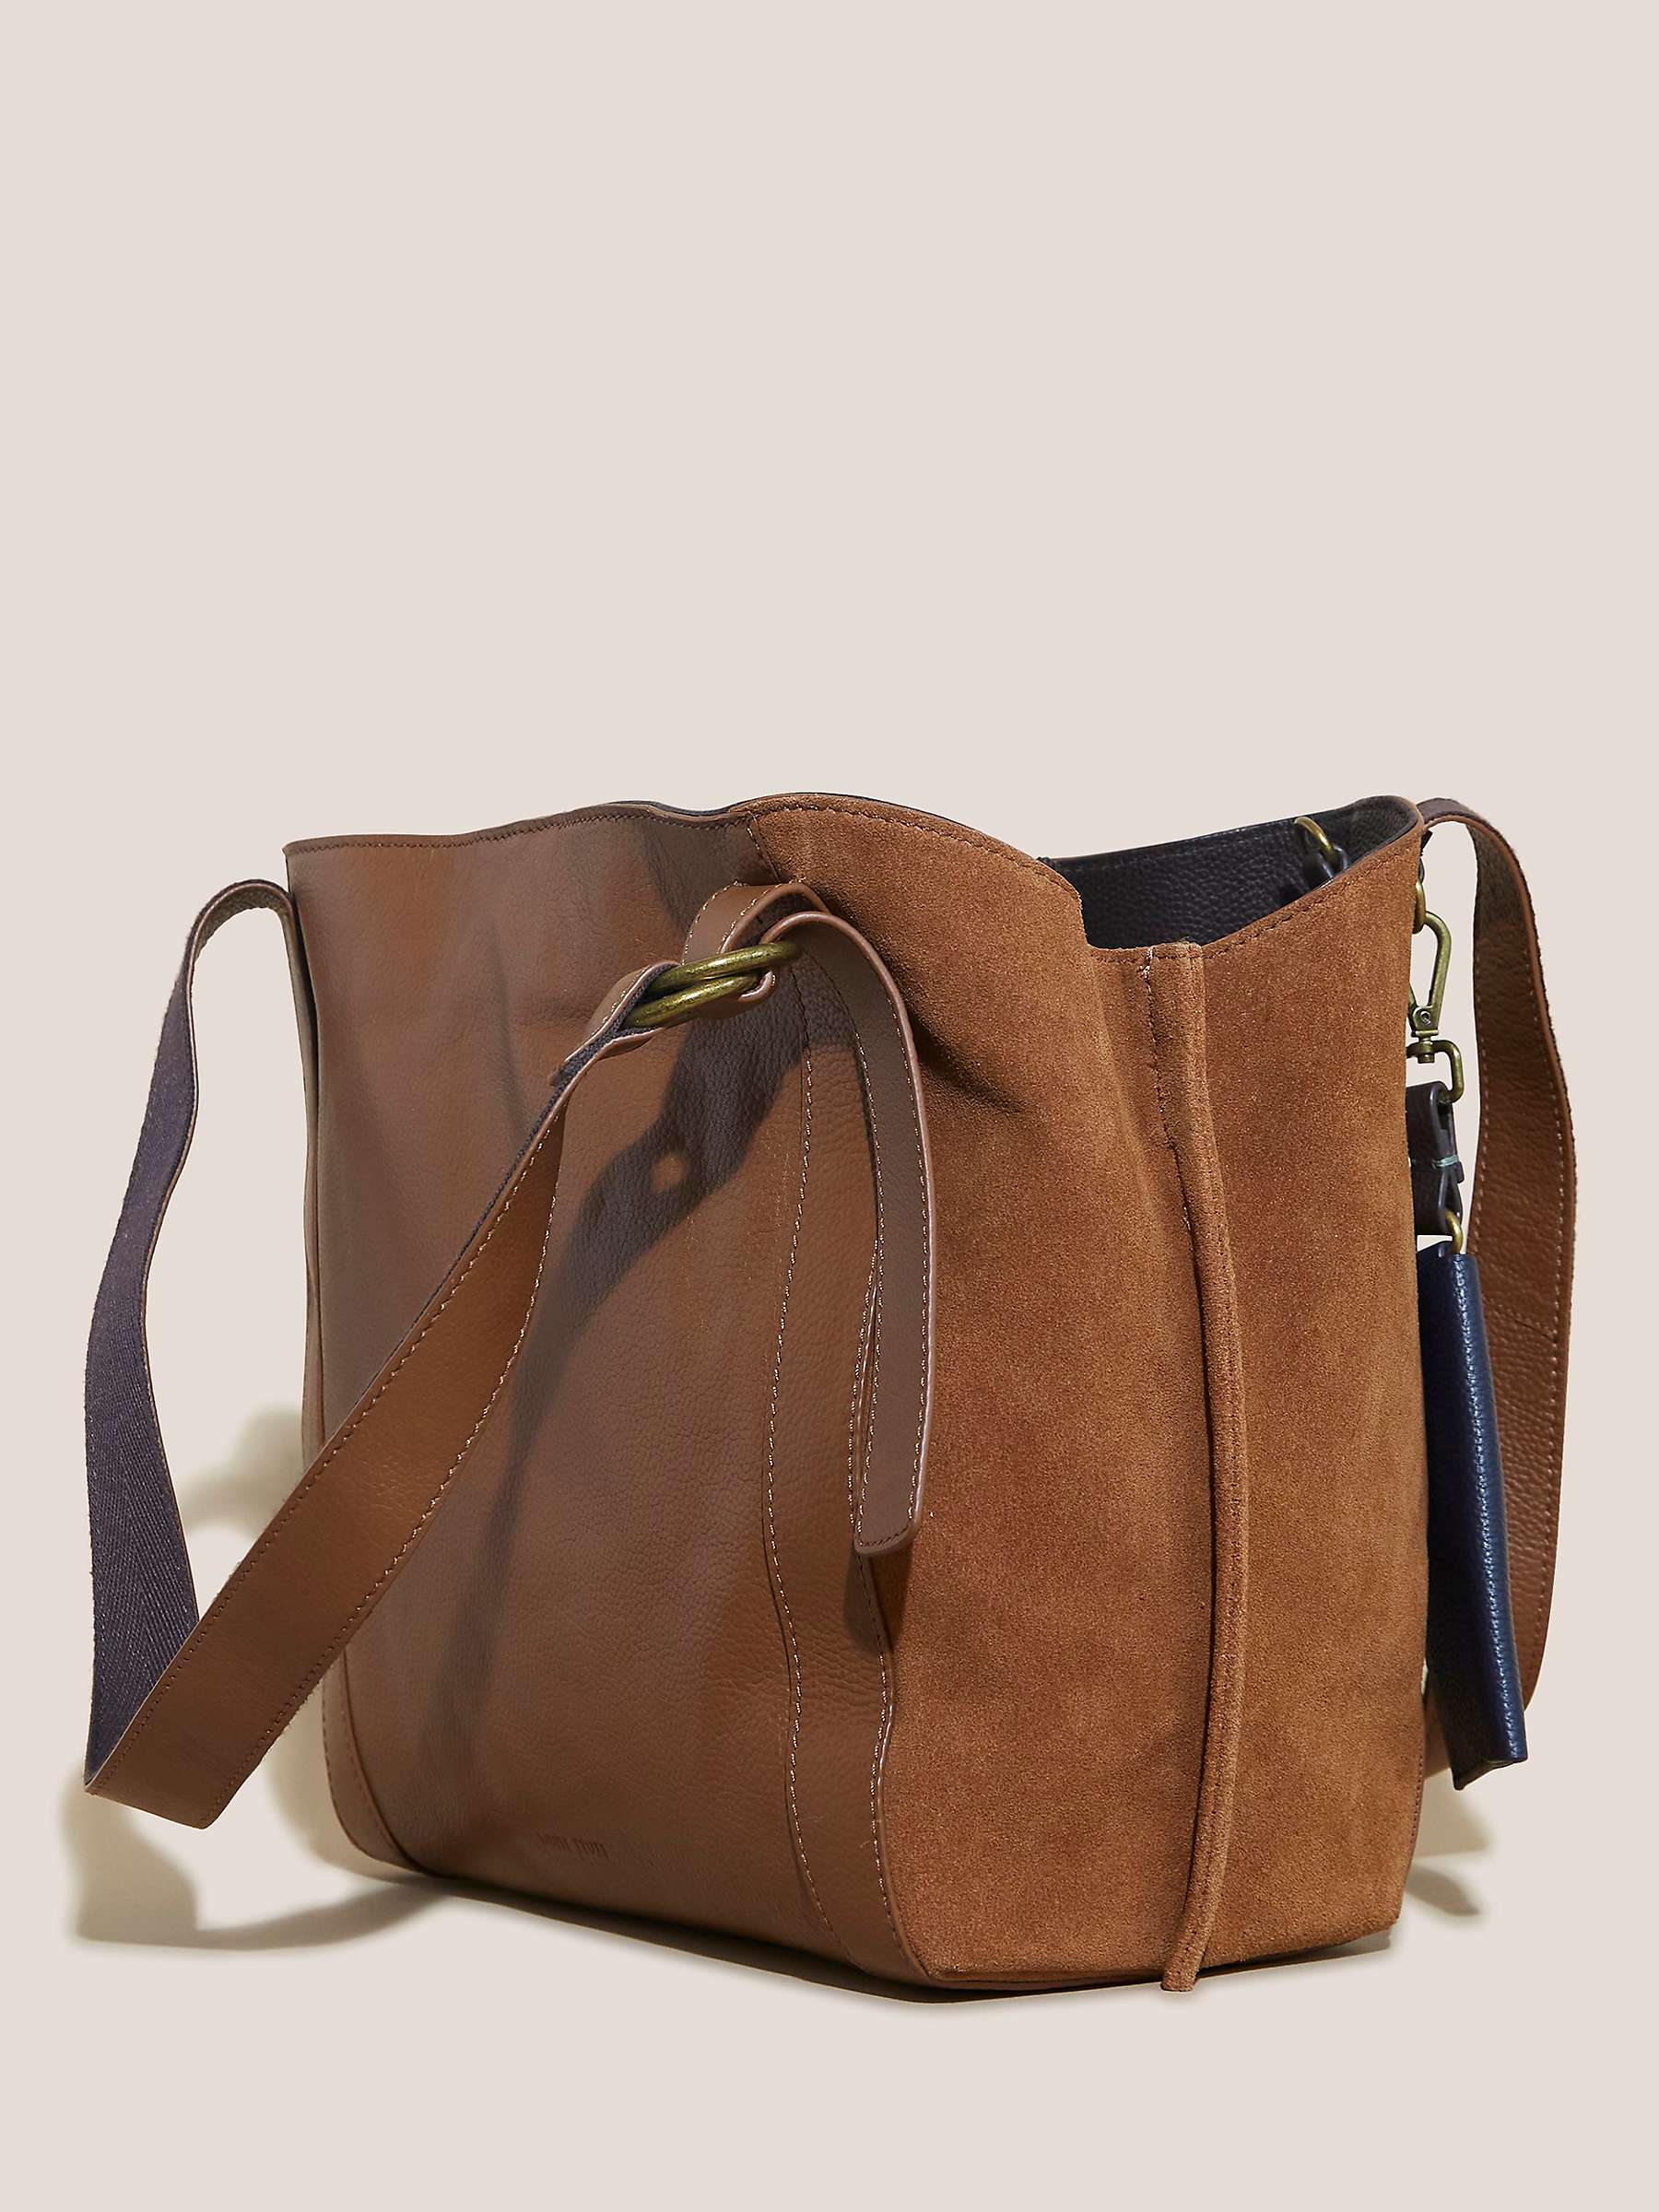 Buy White Stuff Hannah Leather Tote Bag, Mid Tan Online at johnlewis.com